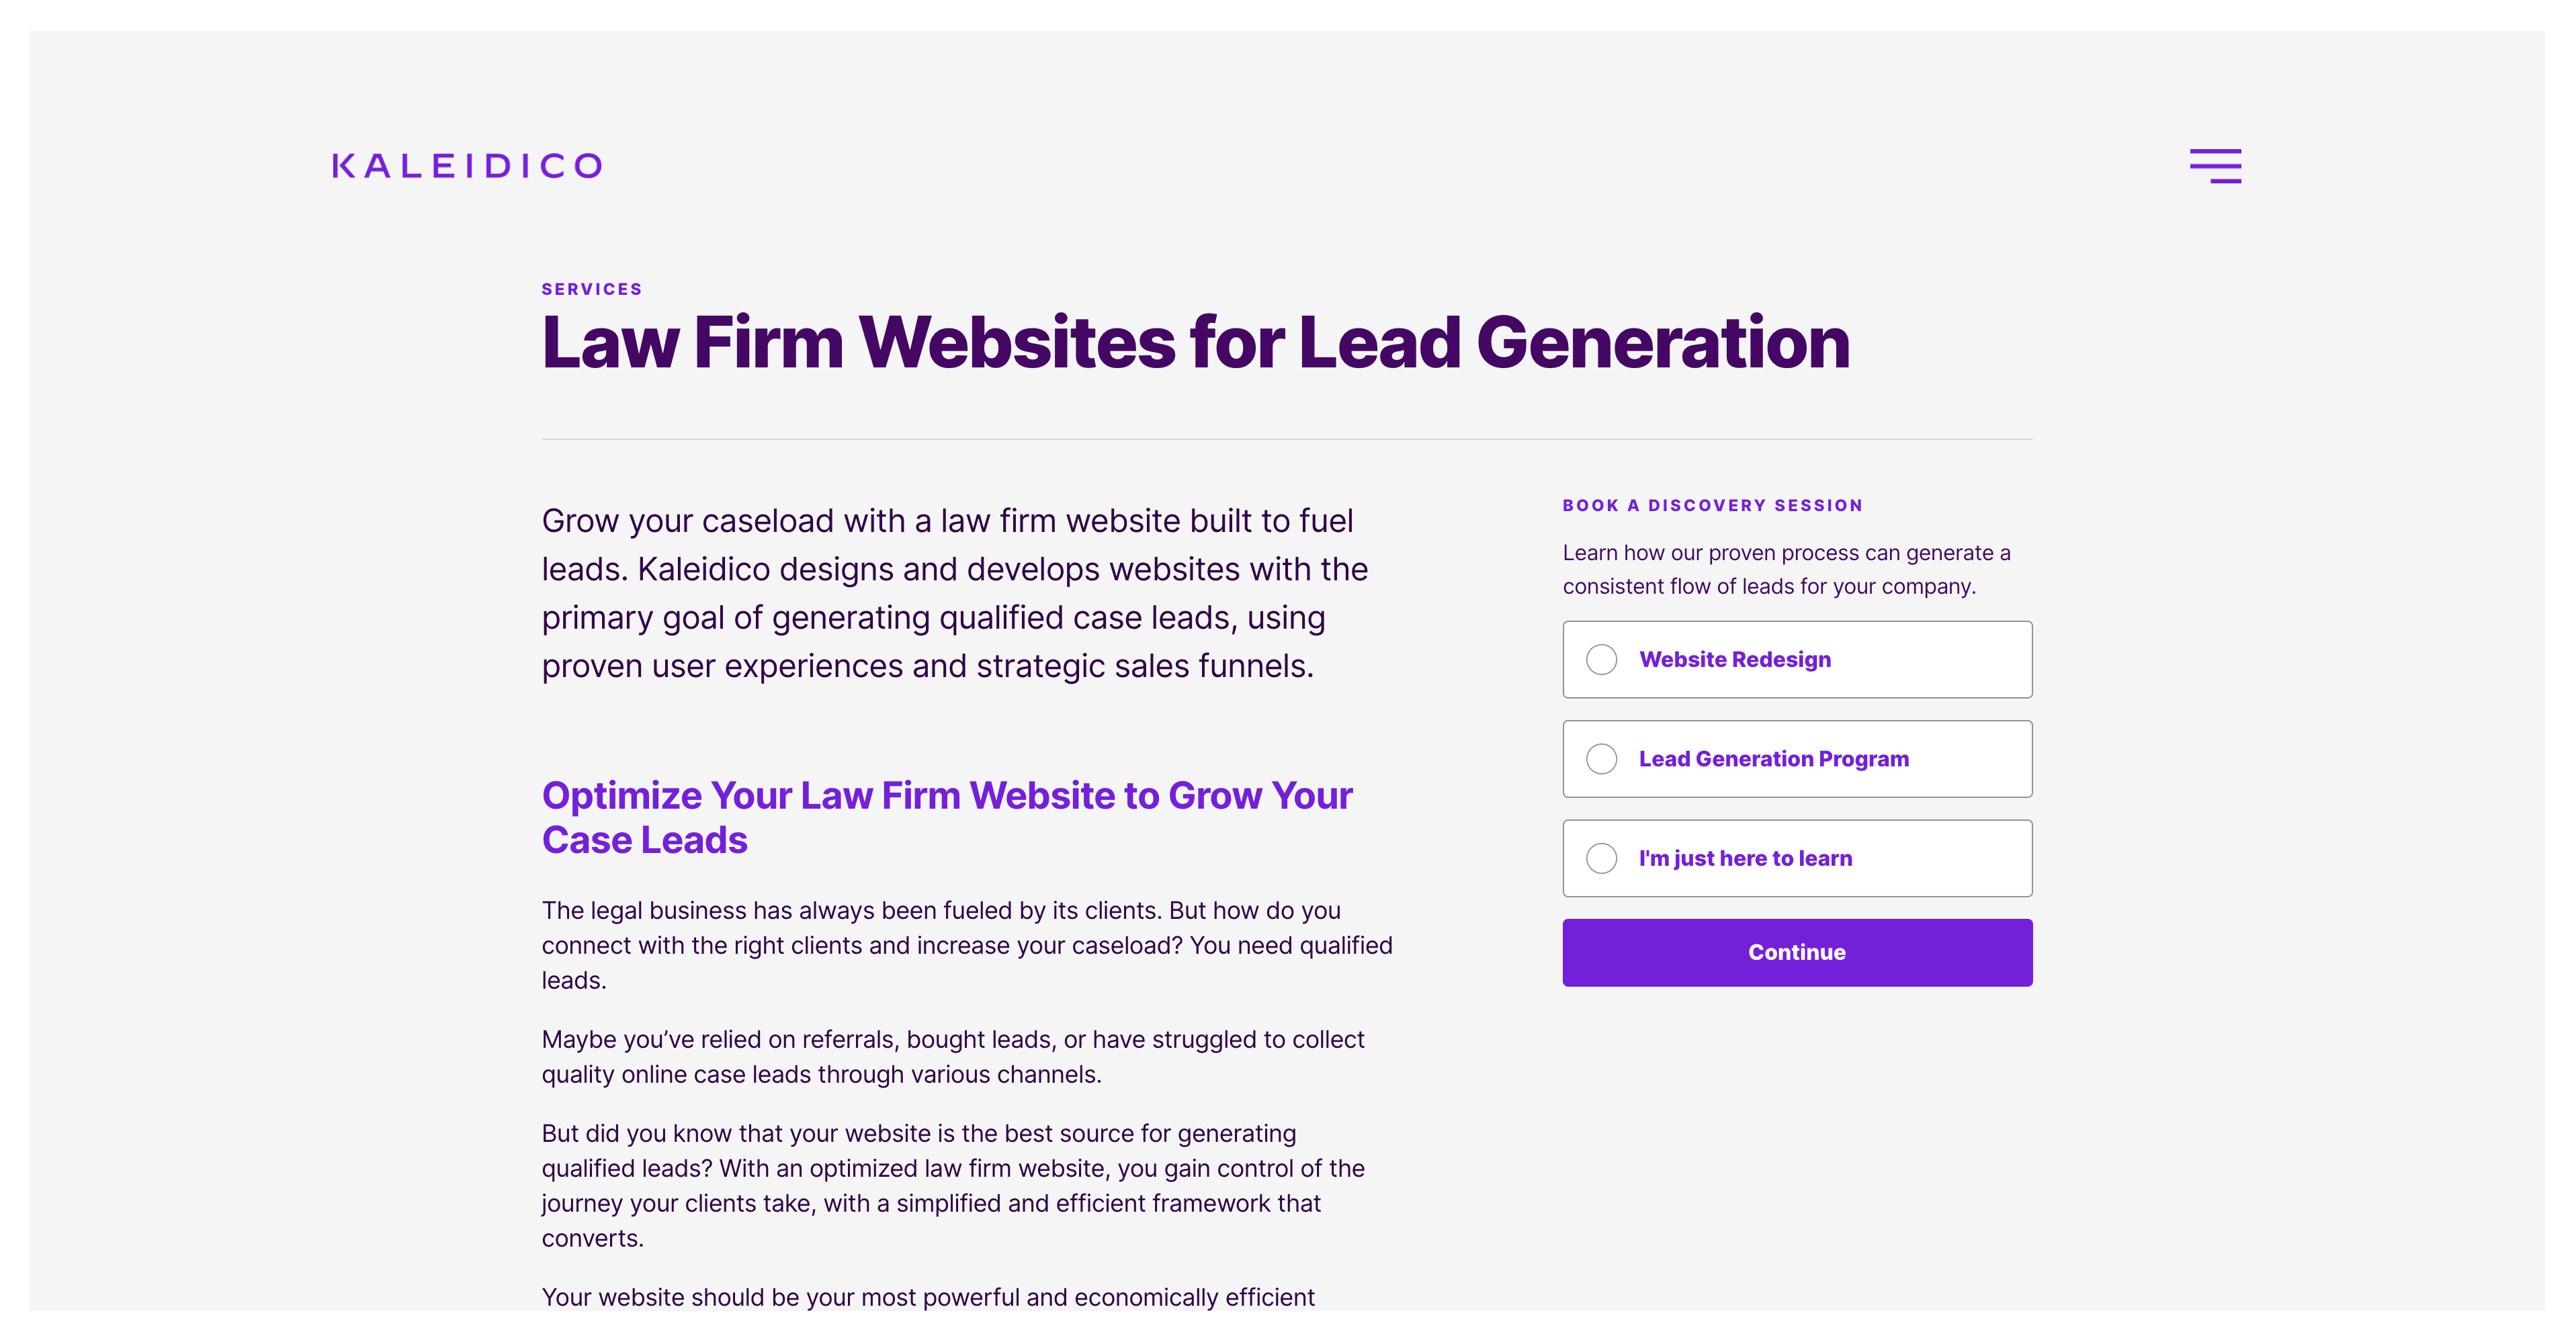 Kaleidico's law firm website for lead generation landing page.